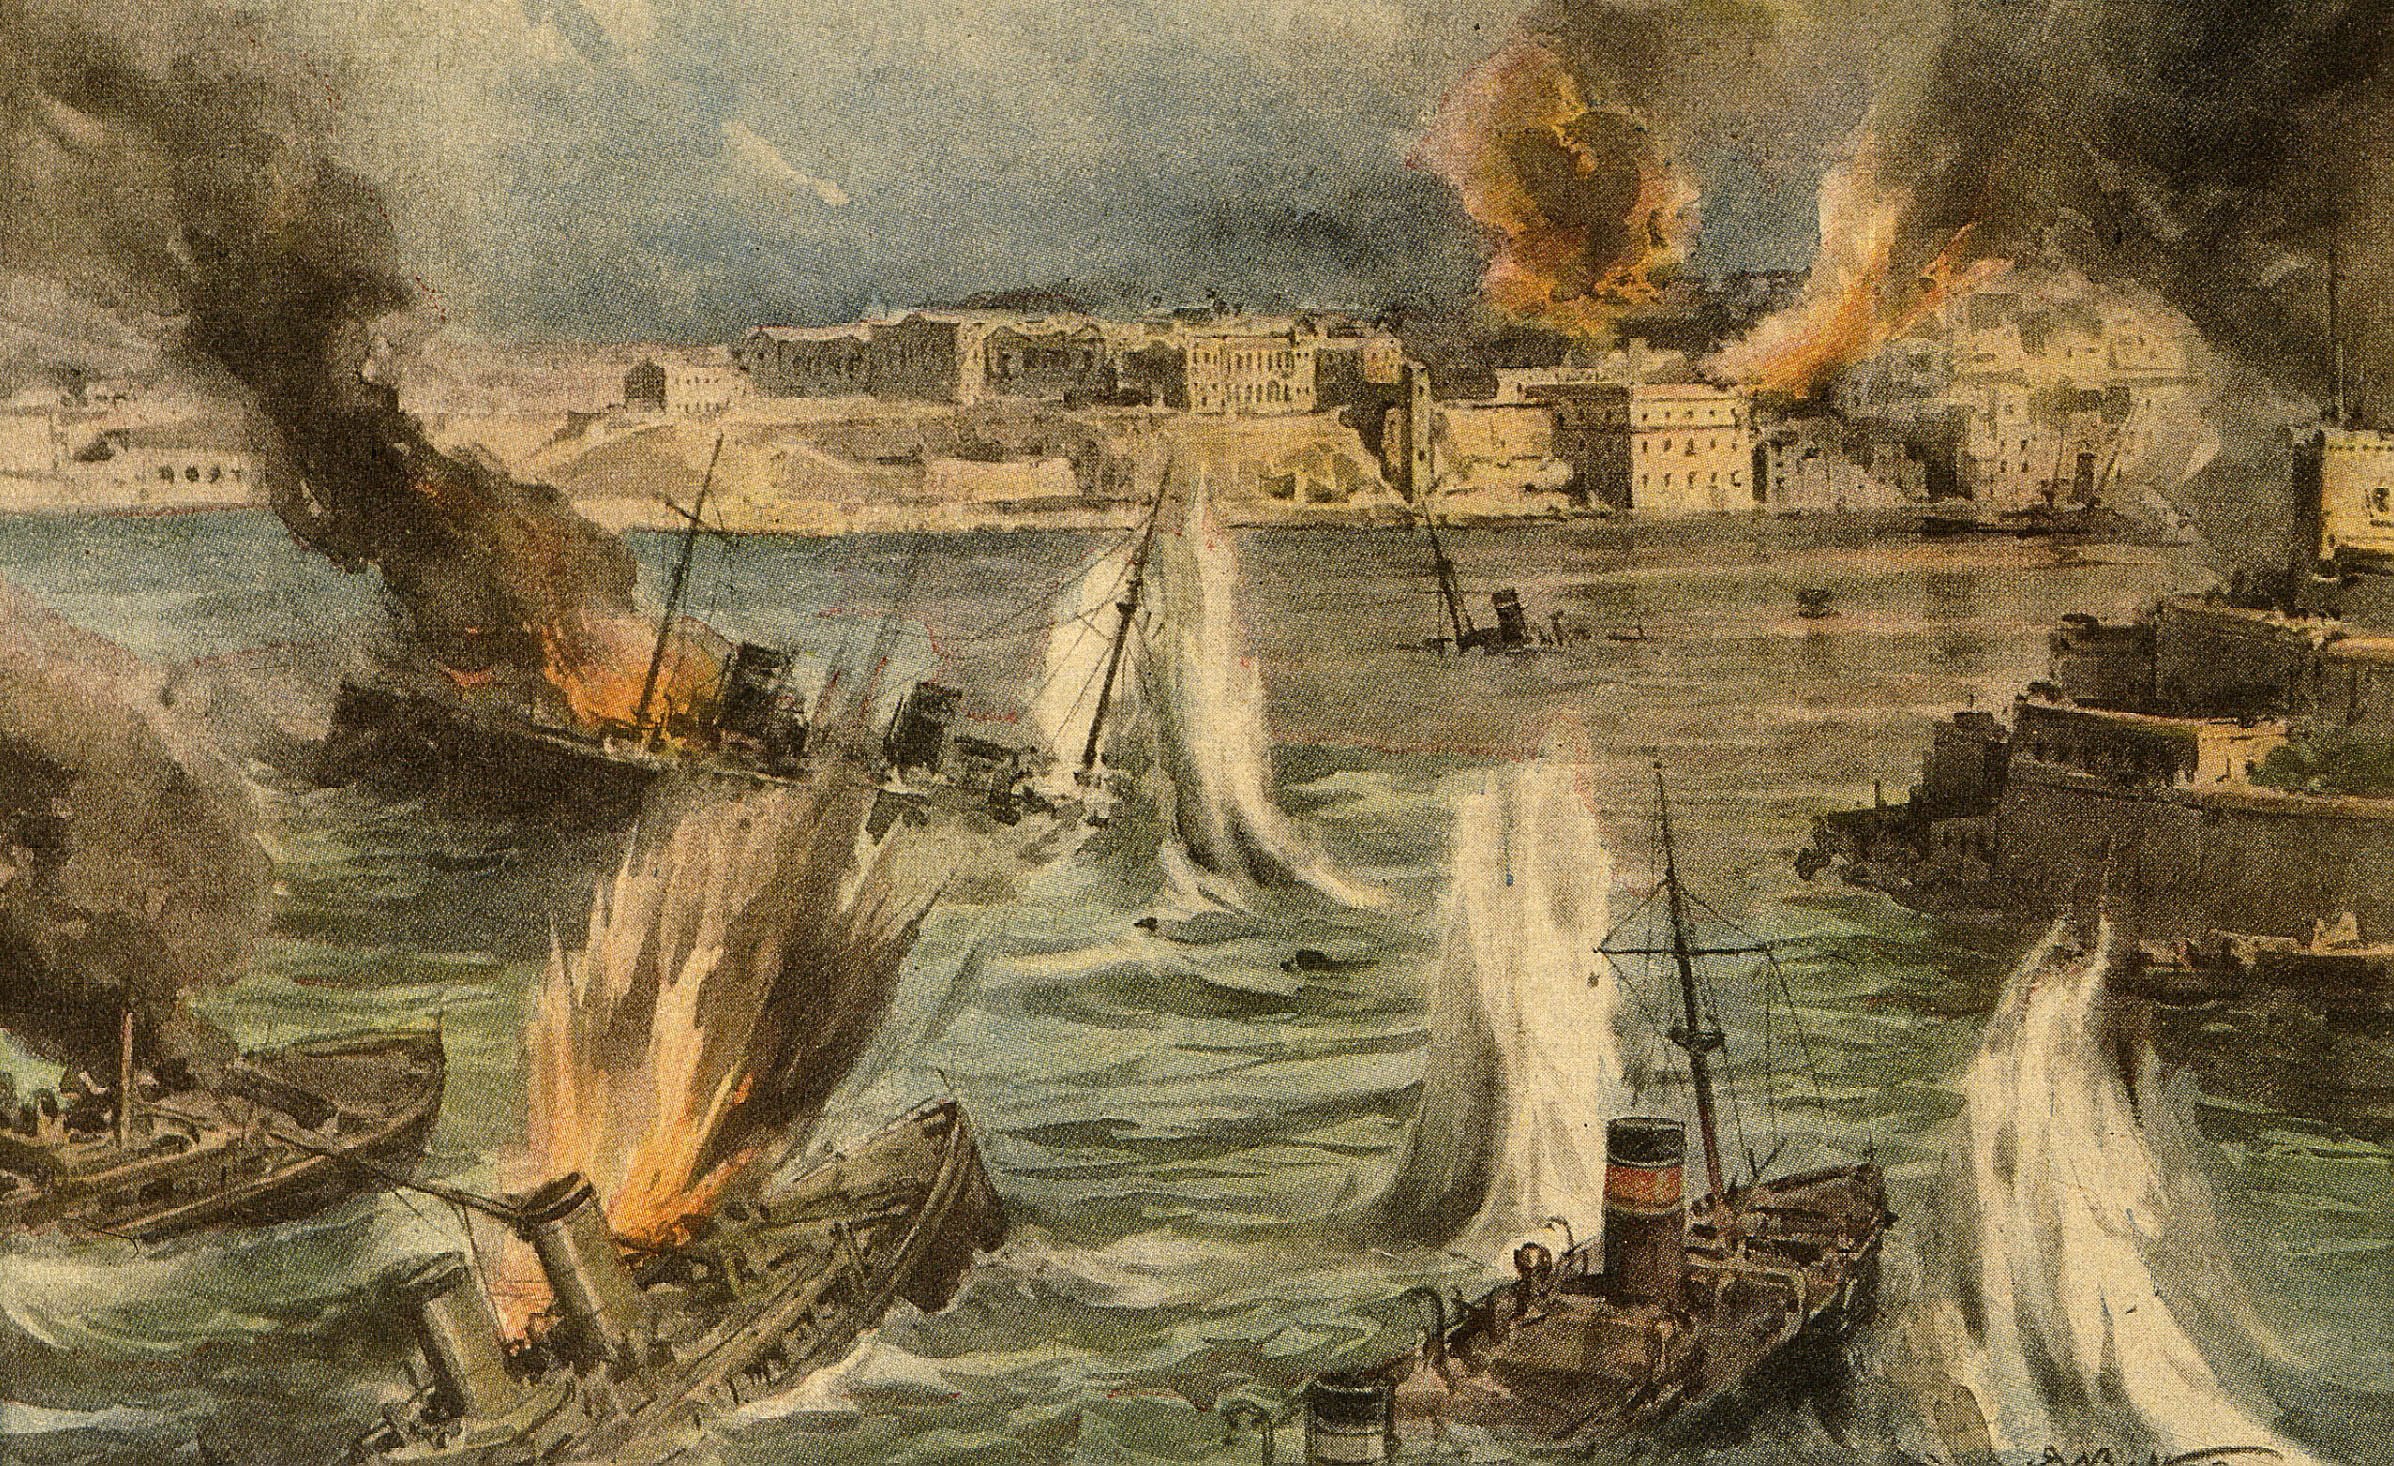 An engraving of a WWII air attack on Malta in Italian newspaper La Domenica del Corriere in October 1942.